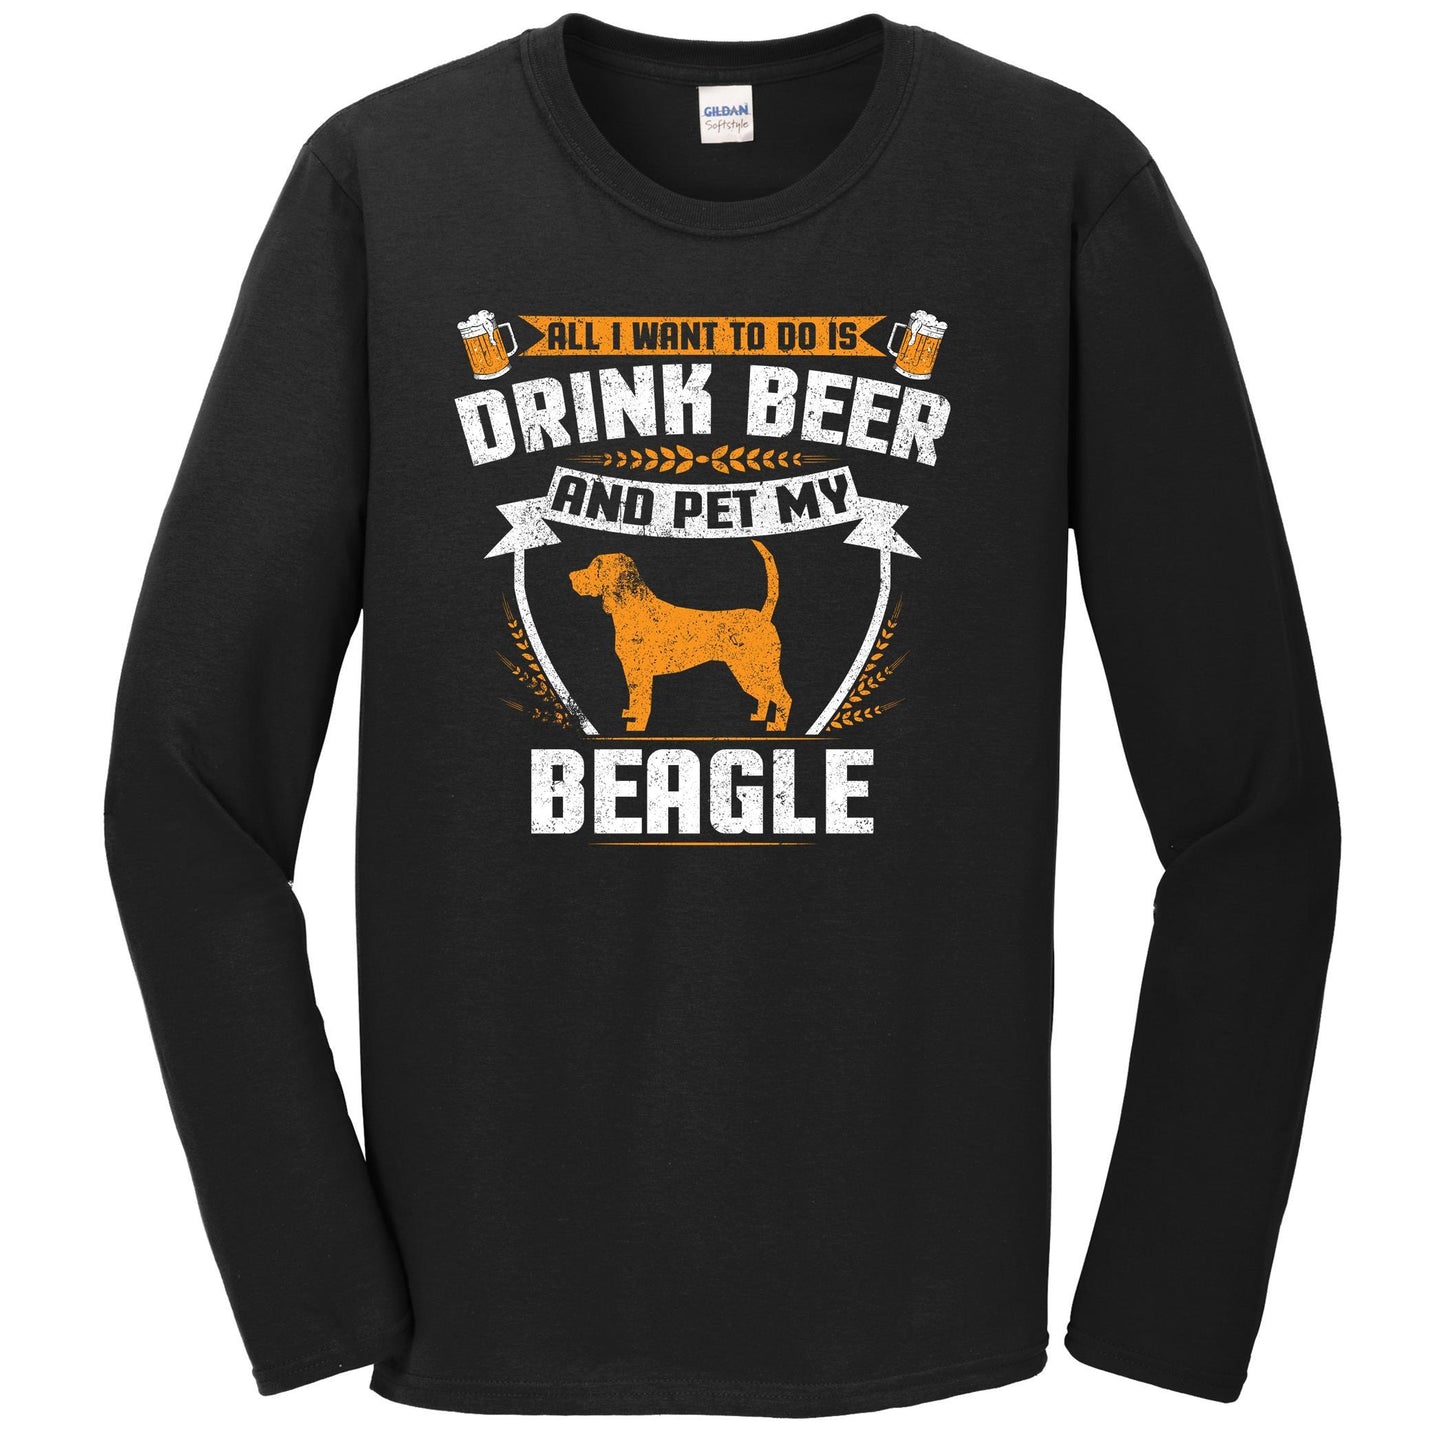 All I Want To Do Is Drink Beer And Pet My Beagle Funny Dog Owner Long Sleeve Shirt